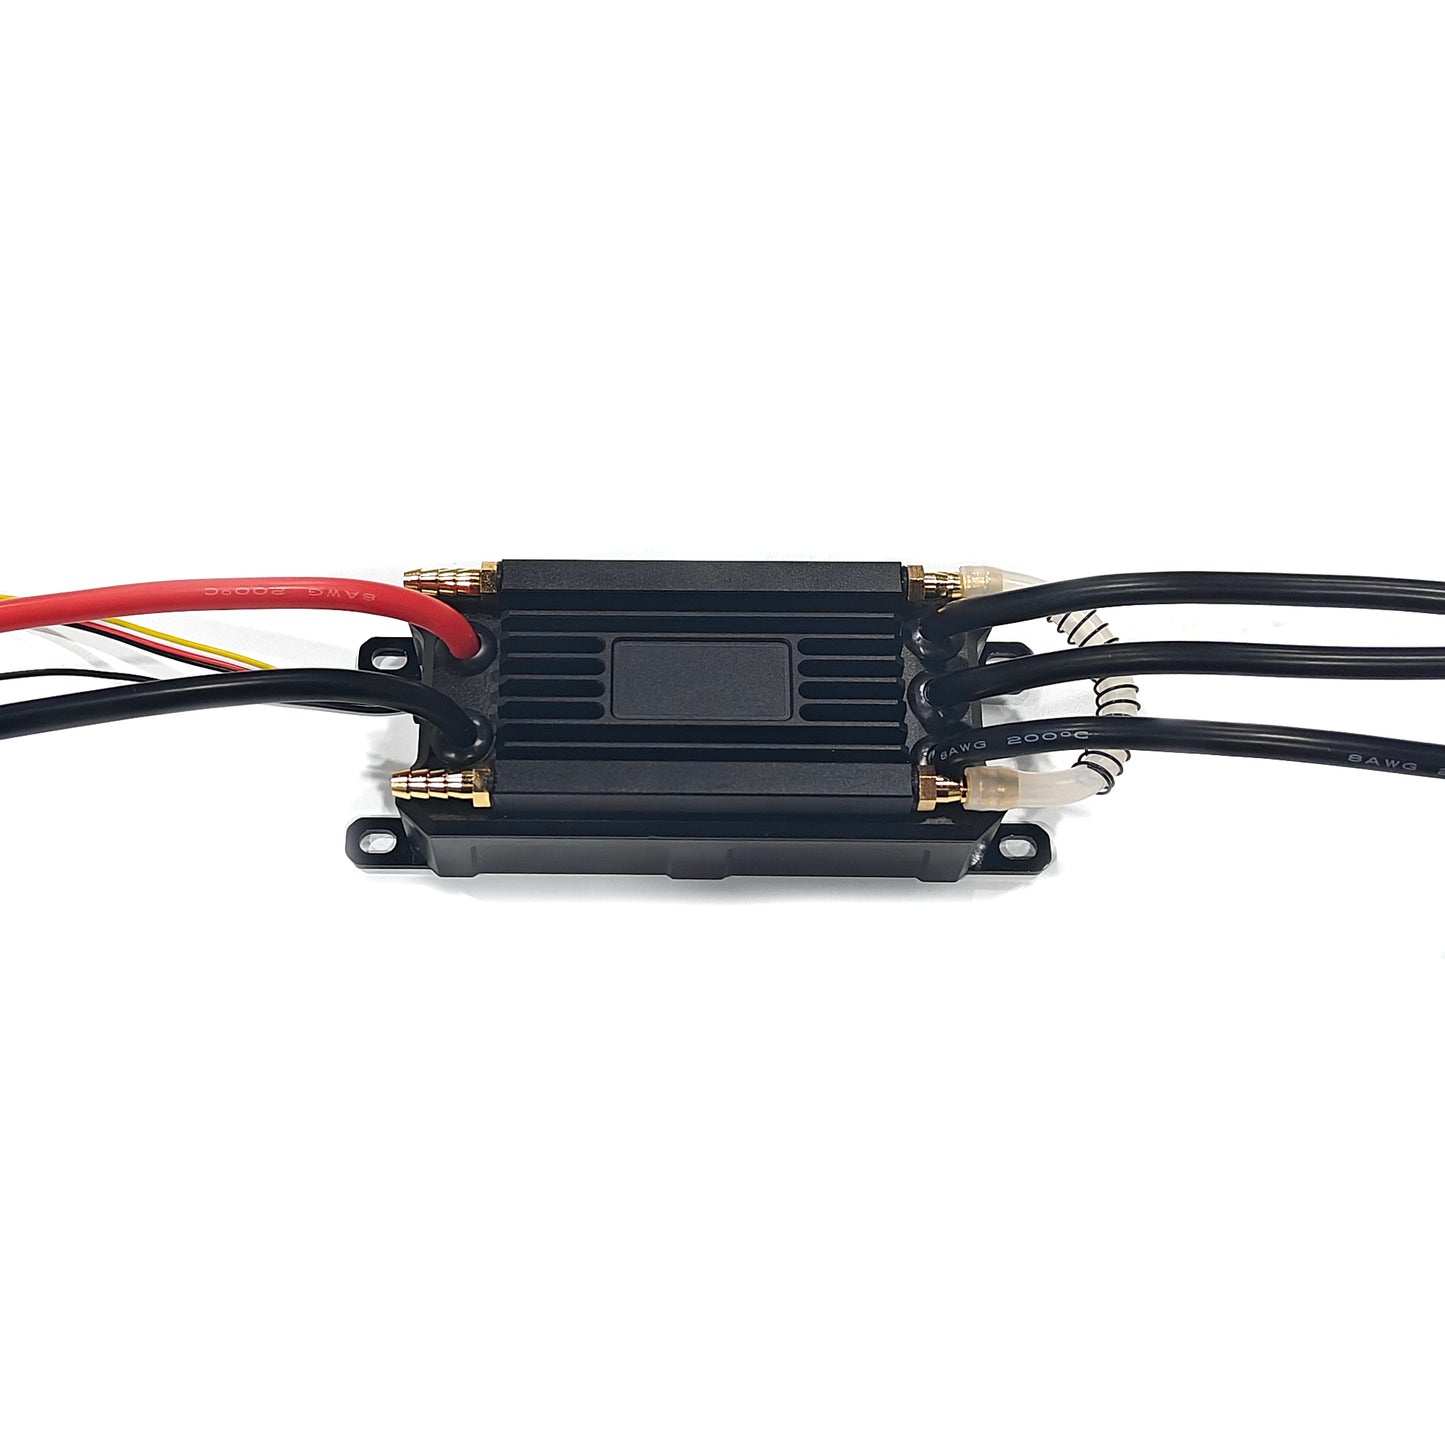 【IP68】Maytech New 32Bit 300A ESC 60V or 75V Waterproof Electric Speed Controller for Eletric Surfboard Efoil Boat